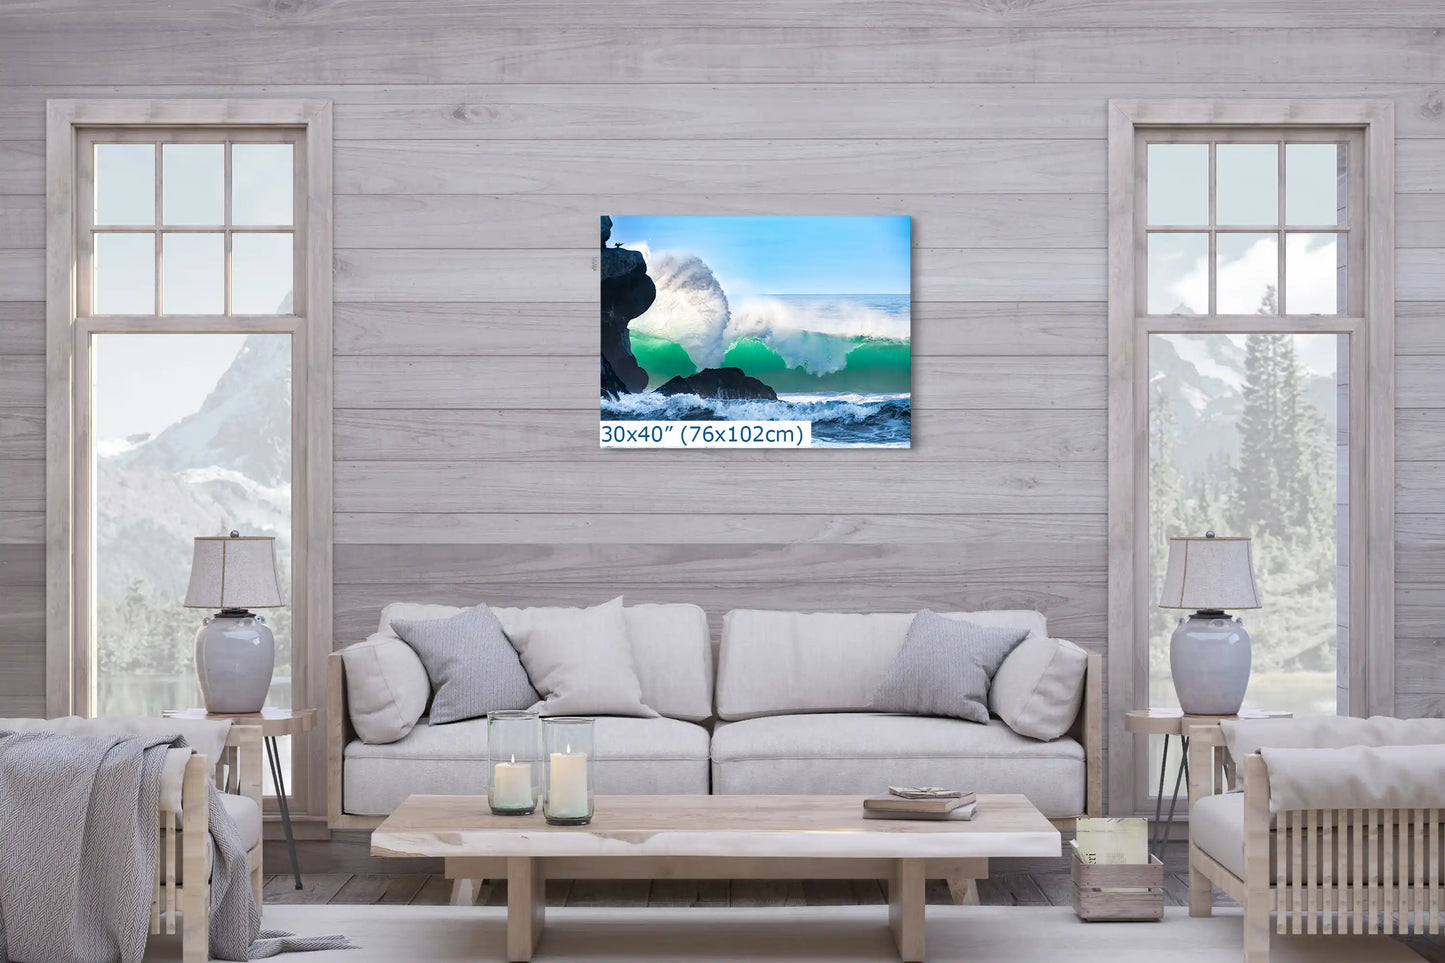 A large 30"x40" canvas print of an ocean wave crashing near Morro Rock, creating a serene backdrop in a cozy living room setting.